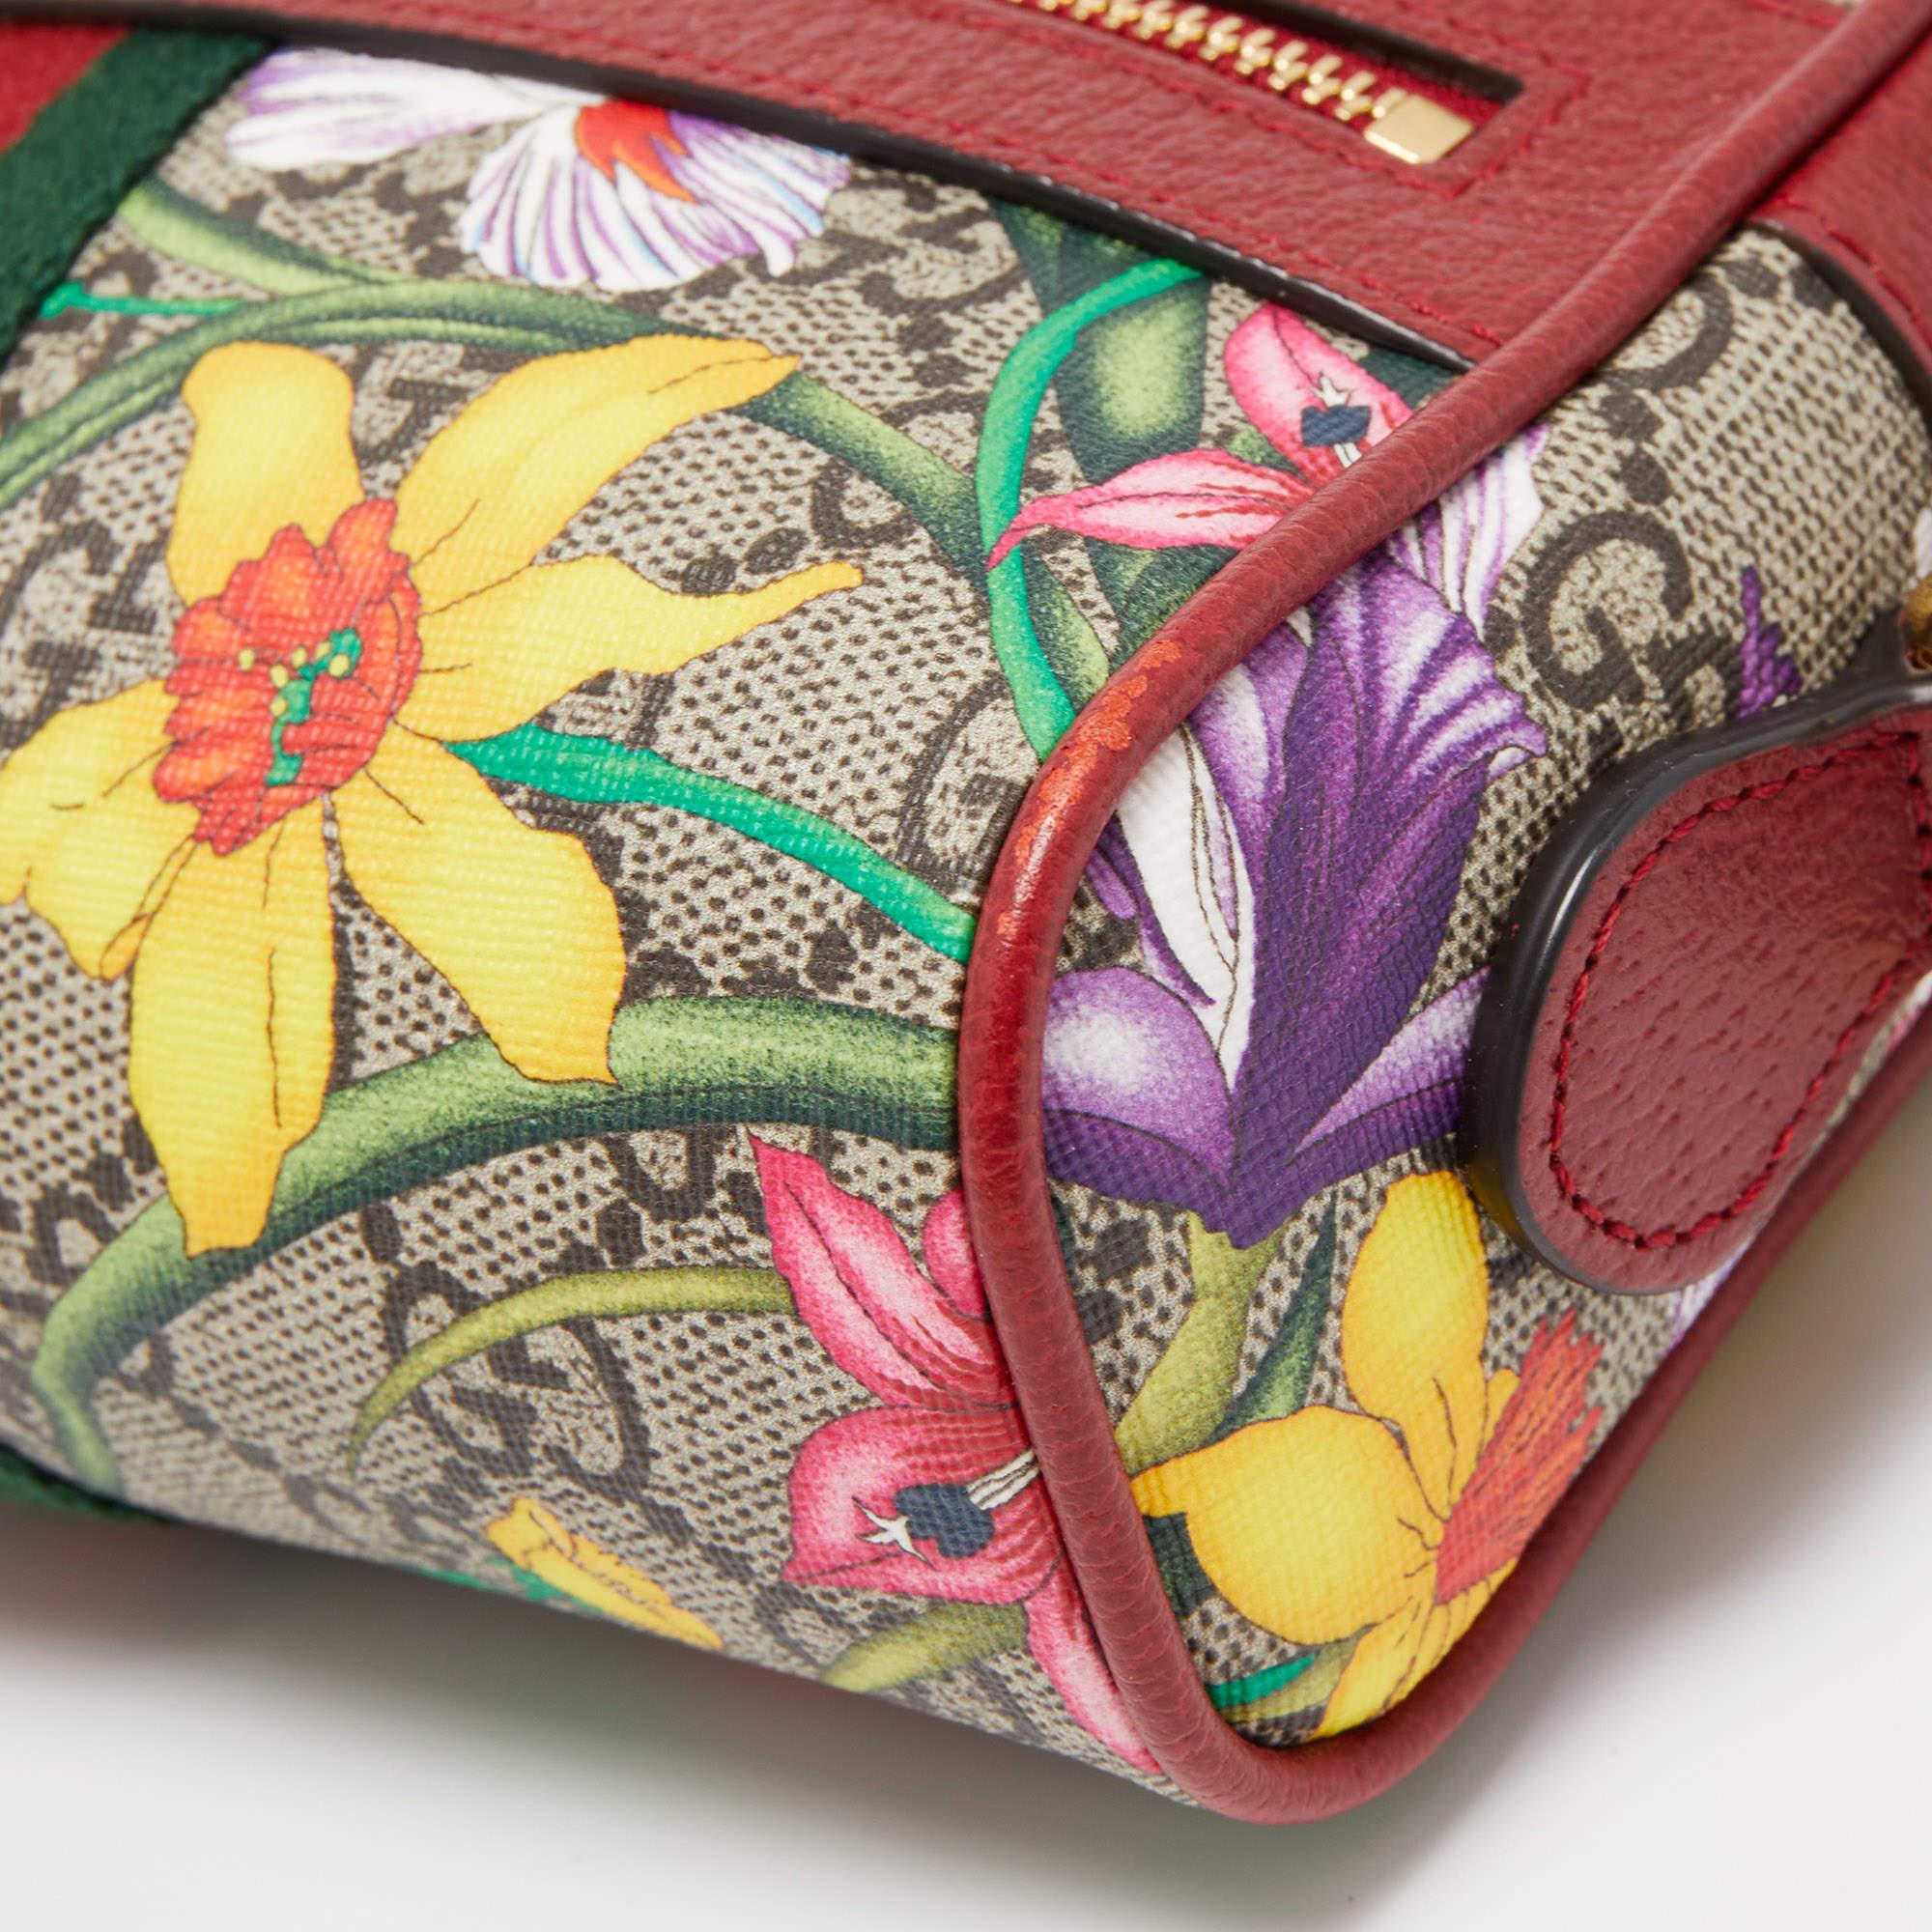 Gucci Red/Beige GG Supreme Canvas Mini Floral Ophidia Crossbody Bag 6